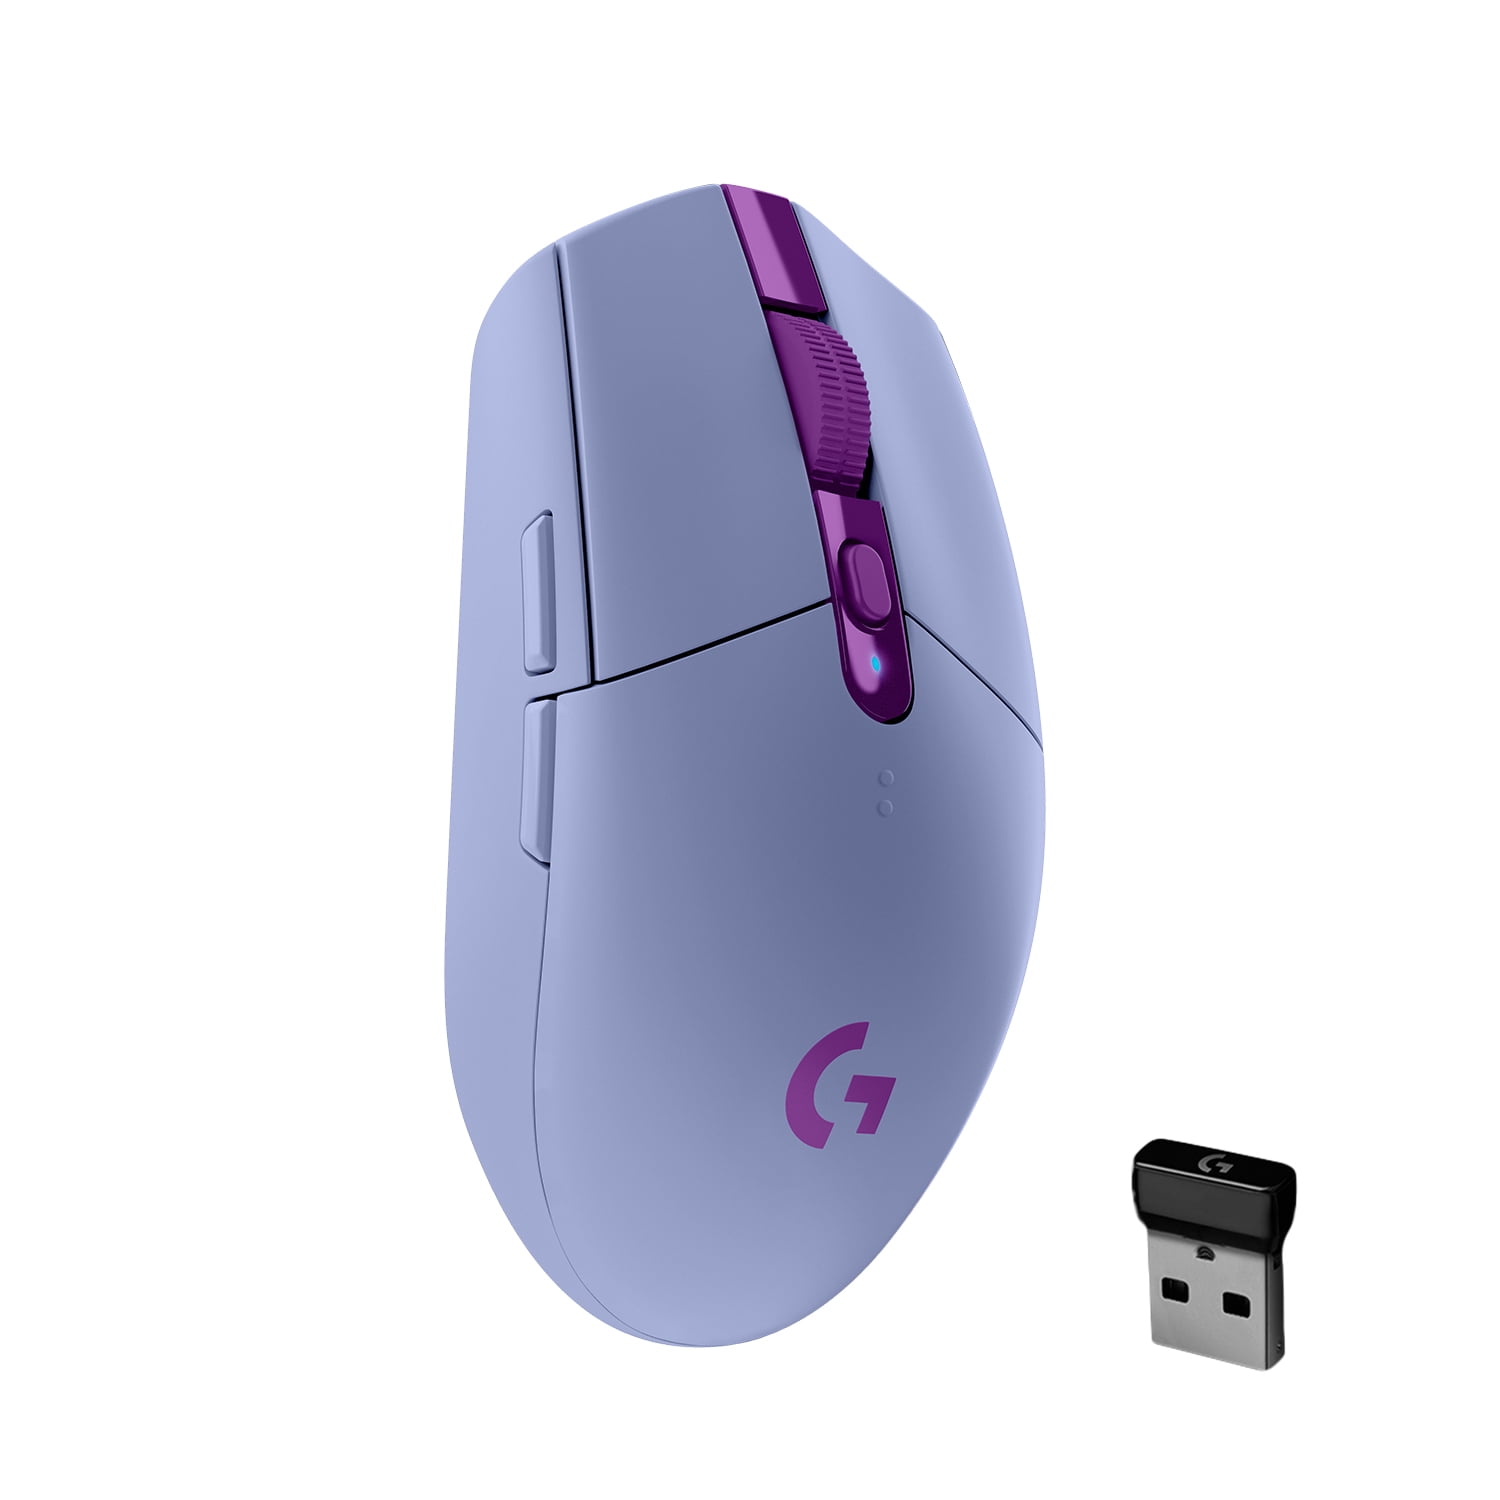 G305 LIGHTSPEED Wireless Gaming Mouse, Sensor, 12,000 DPI, Lightweight, 6 Programmable Buttons, 250h Battery, On-Board Memory, Compatible with PC, Mac - Lilac - Walmart.com